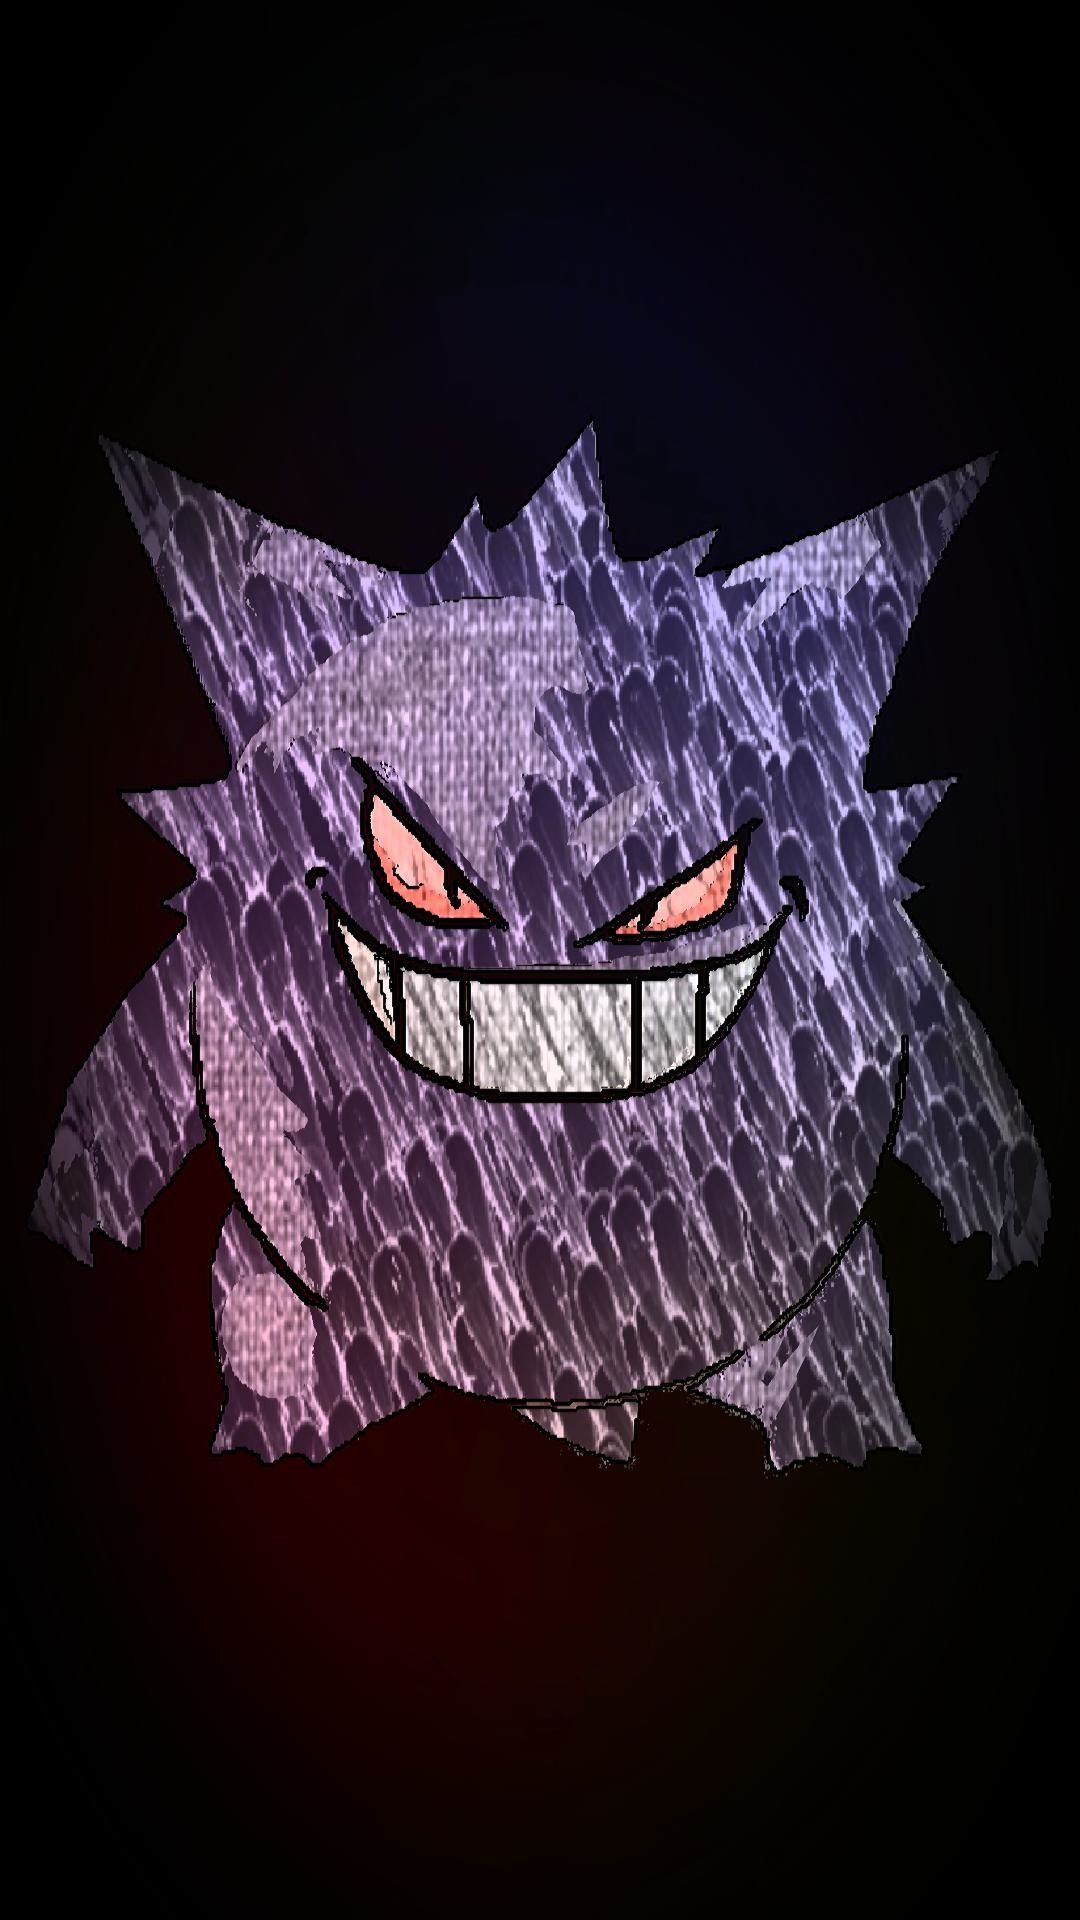 50 Gengar Pokémon HD Wallpapers and Backgrounds